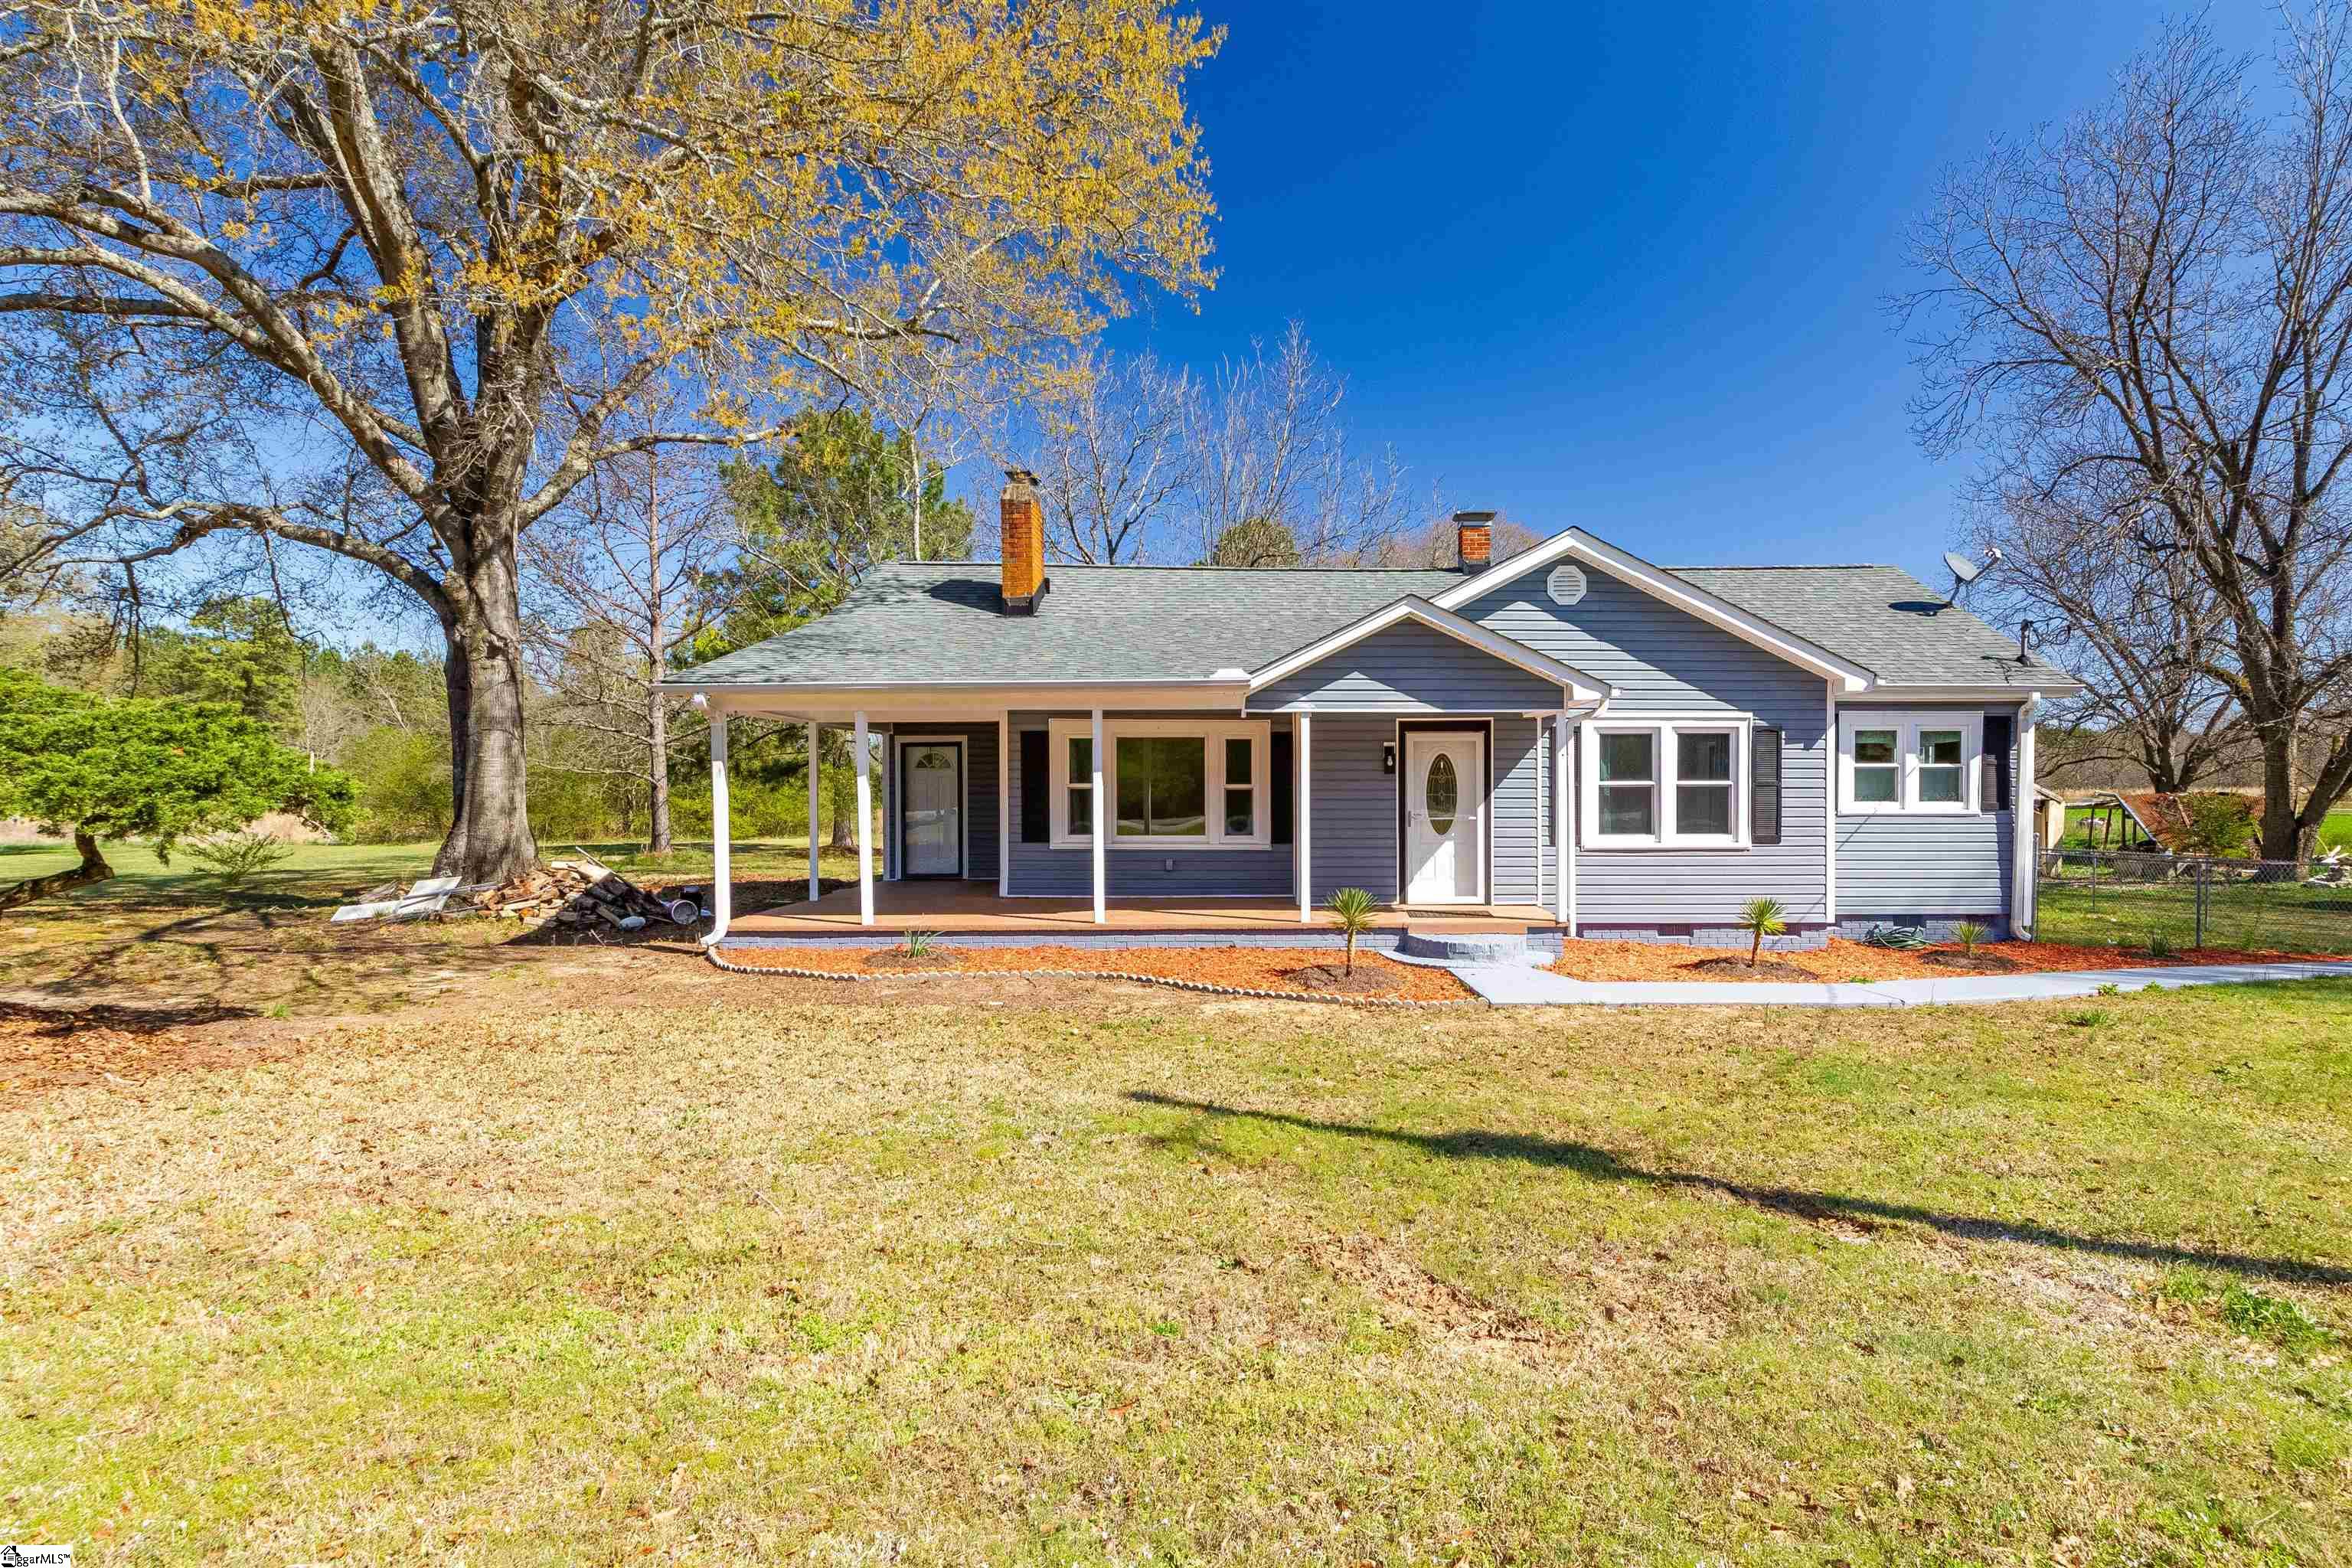 View Ware Shoals, SC 29692 house